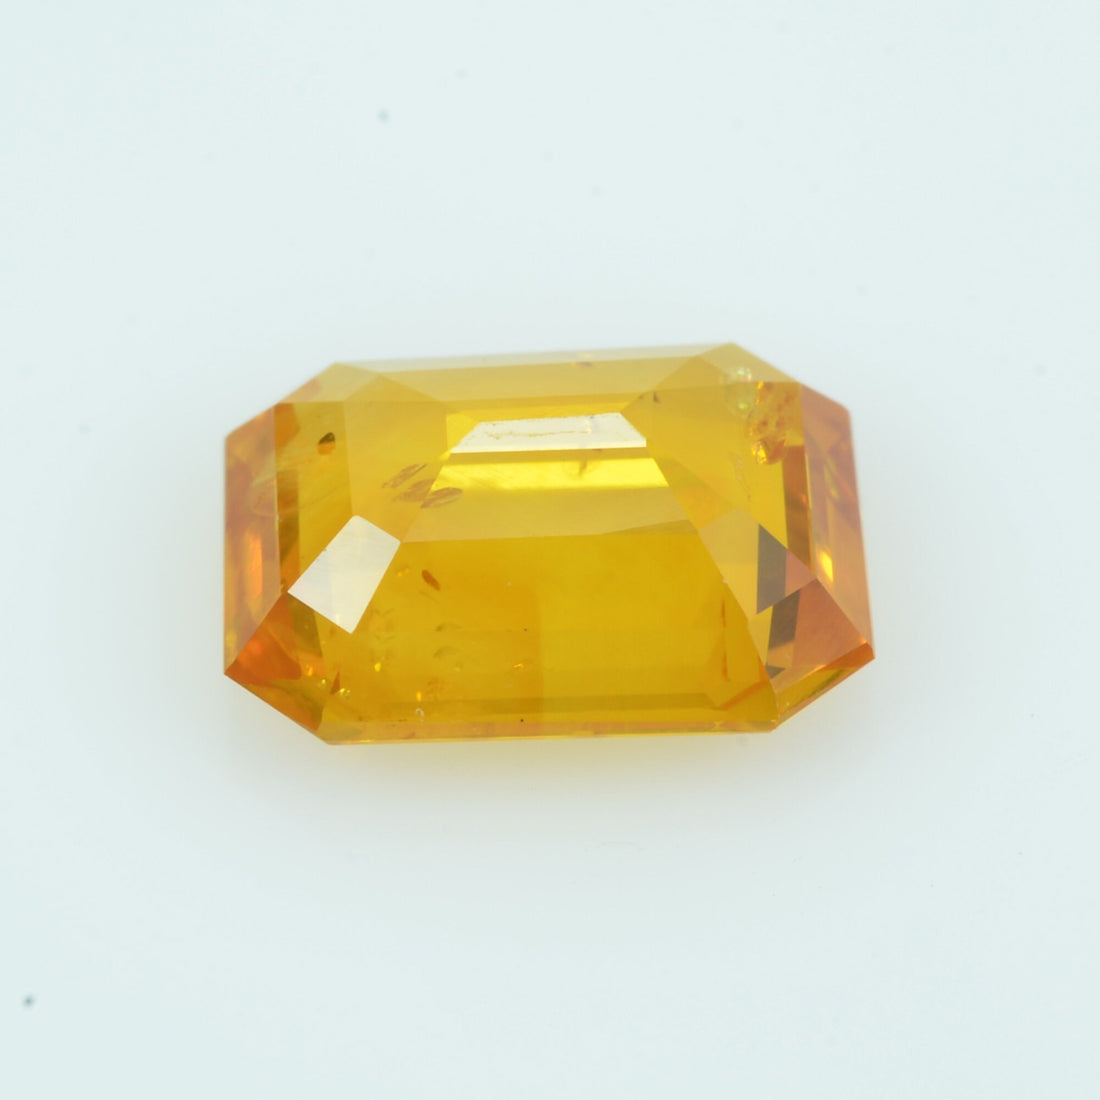 2.42 cts Natural Yellow Sapphire Loose Gemstone Octagon Cut